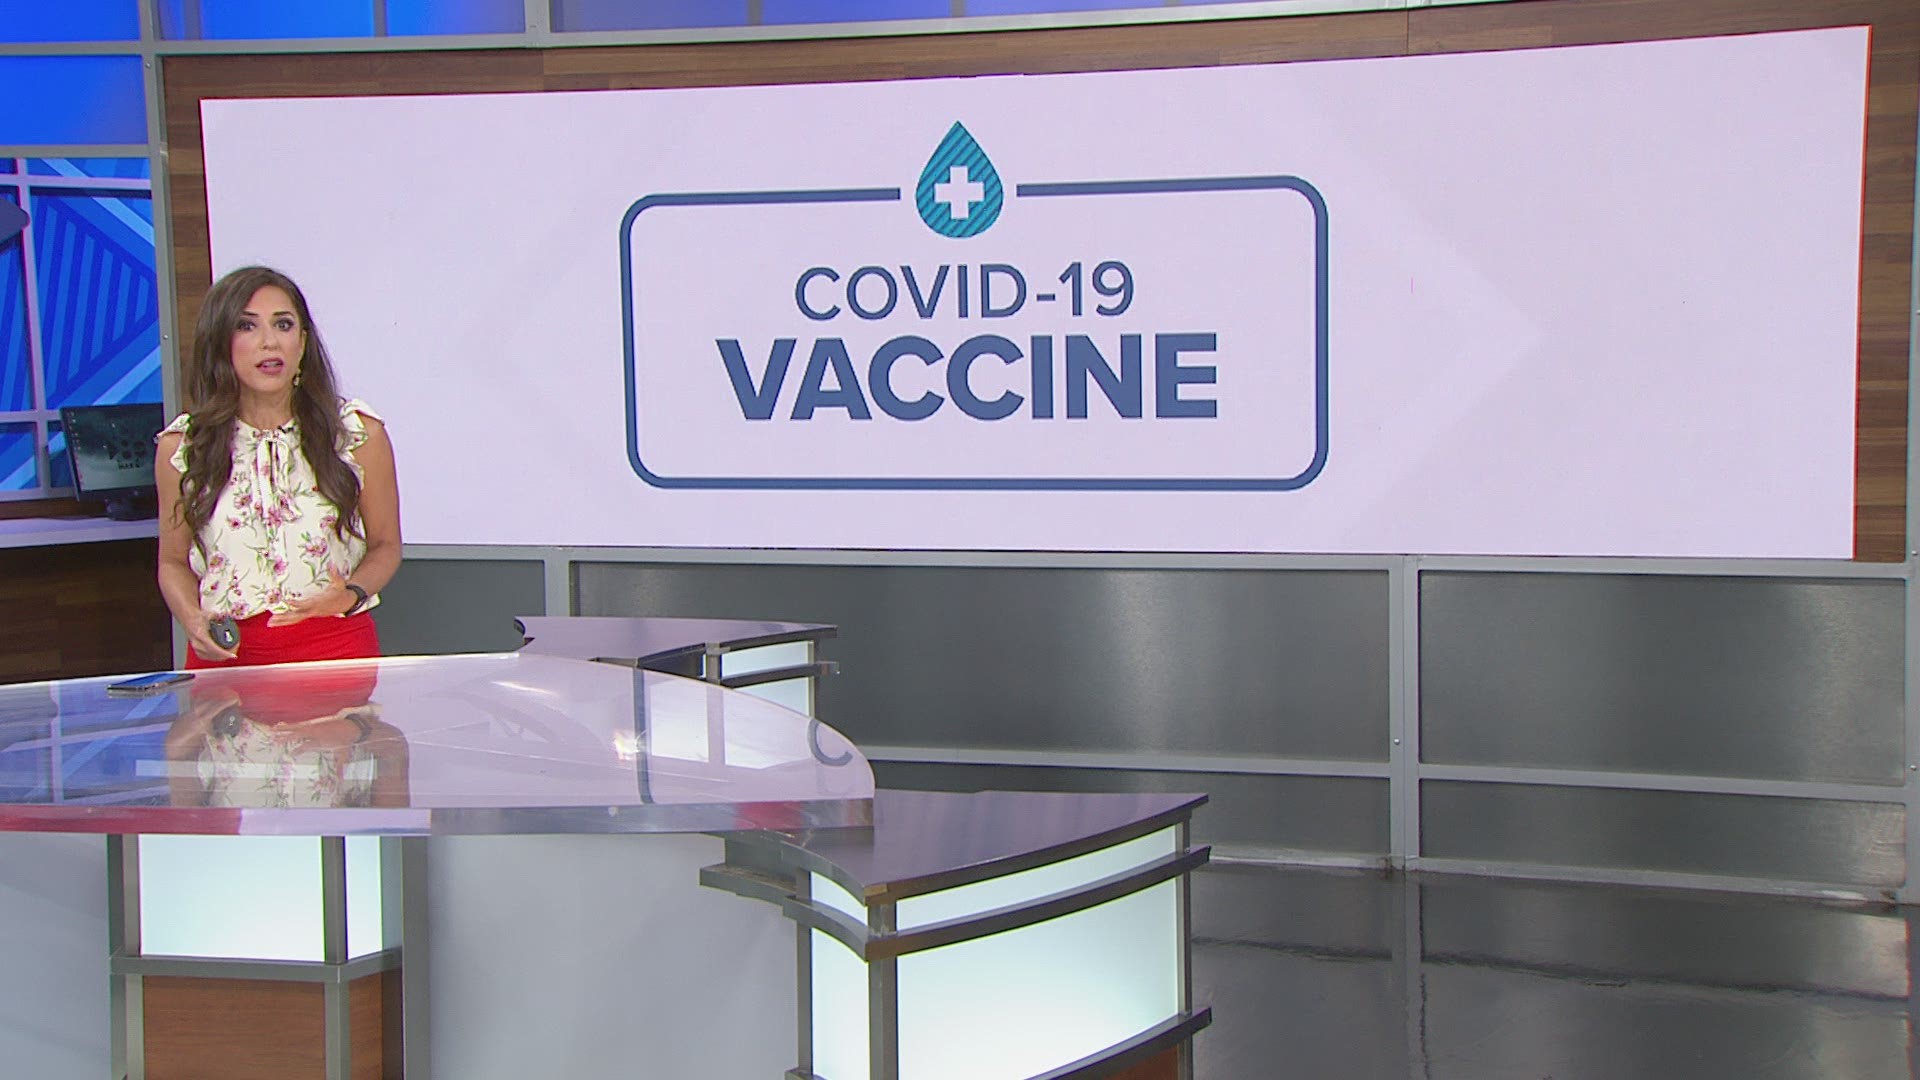 The latest information about where Texans can get the COVID-19 vaccine. Chris Sadeghi talks about a location where no appointment is needed.